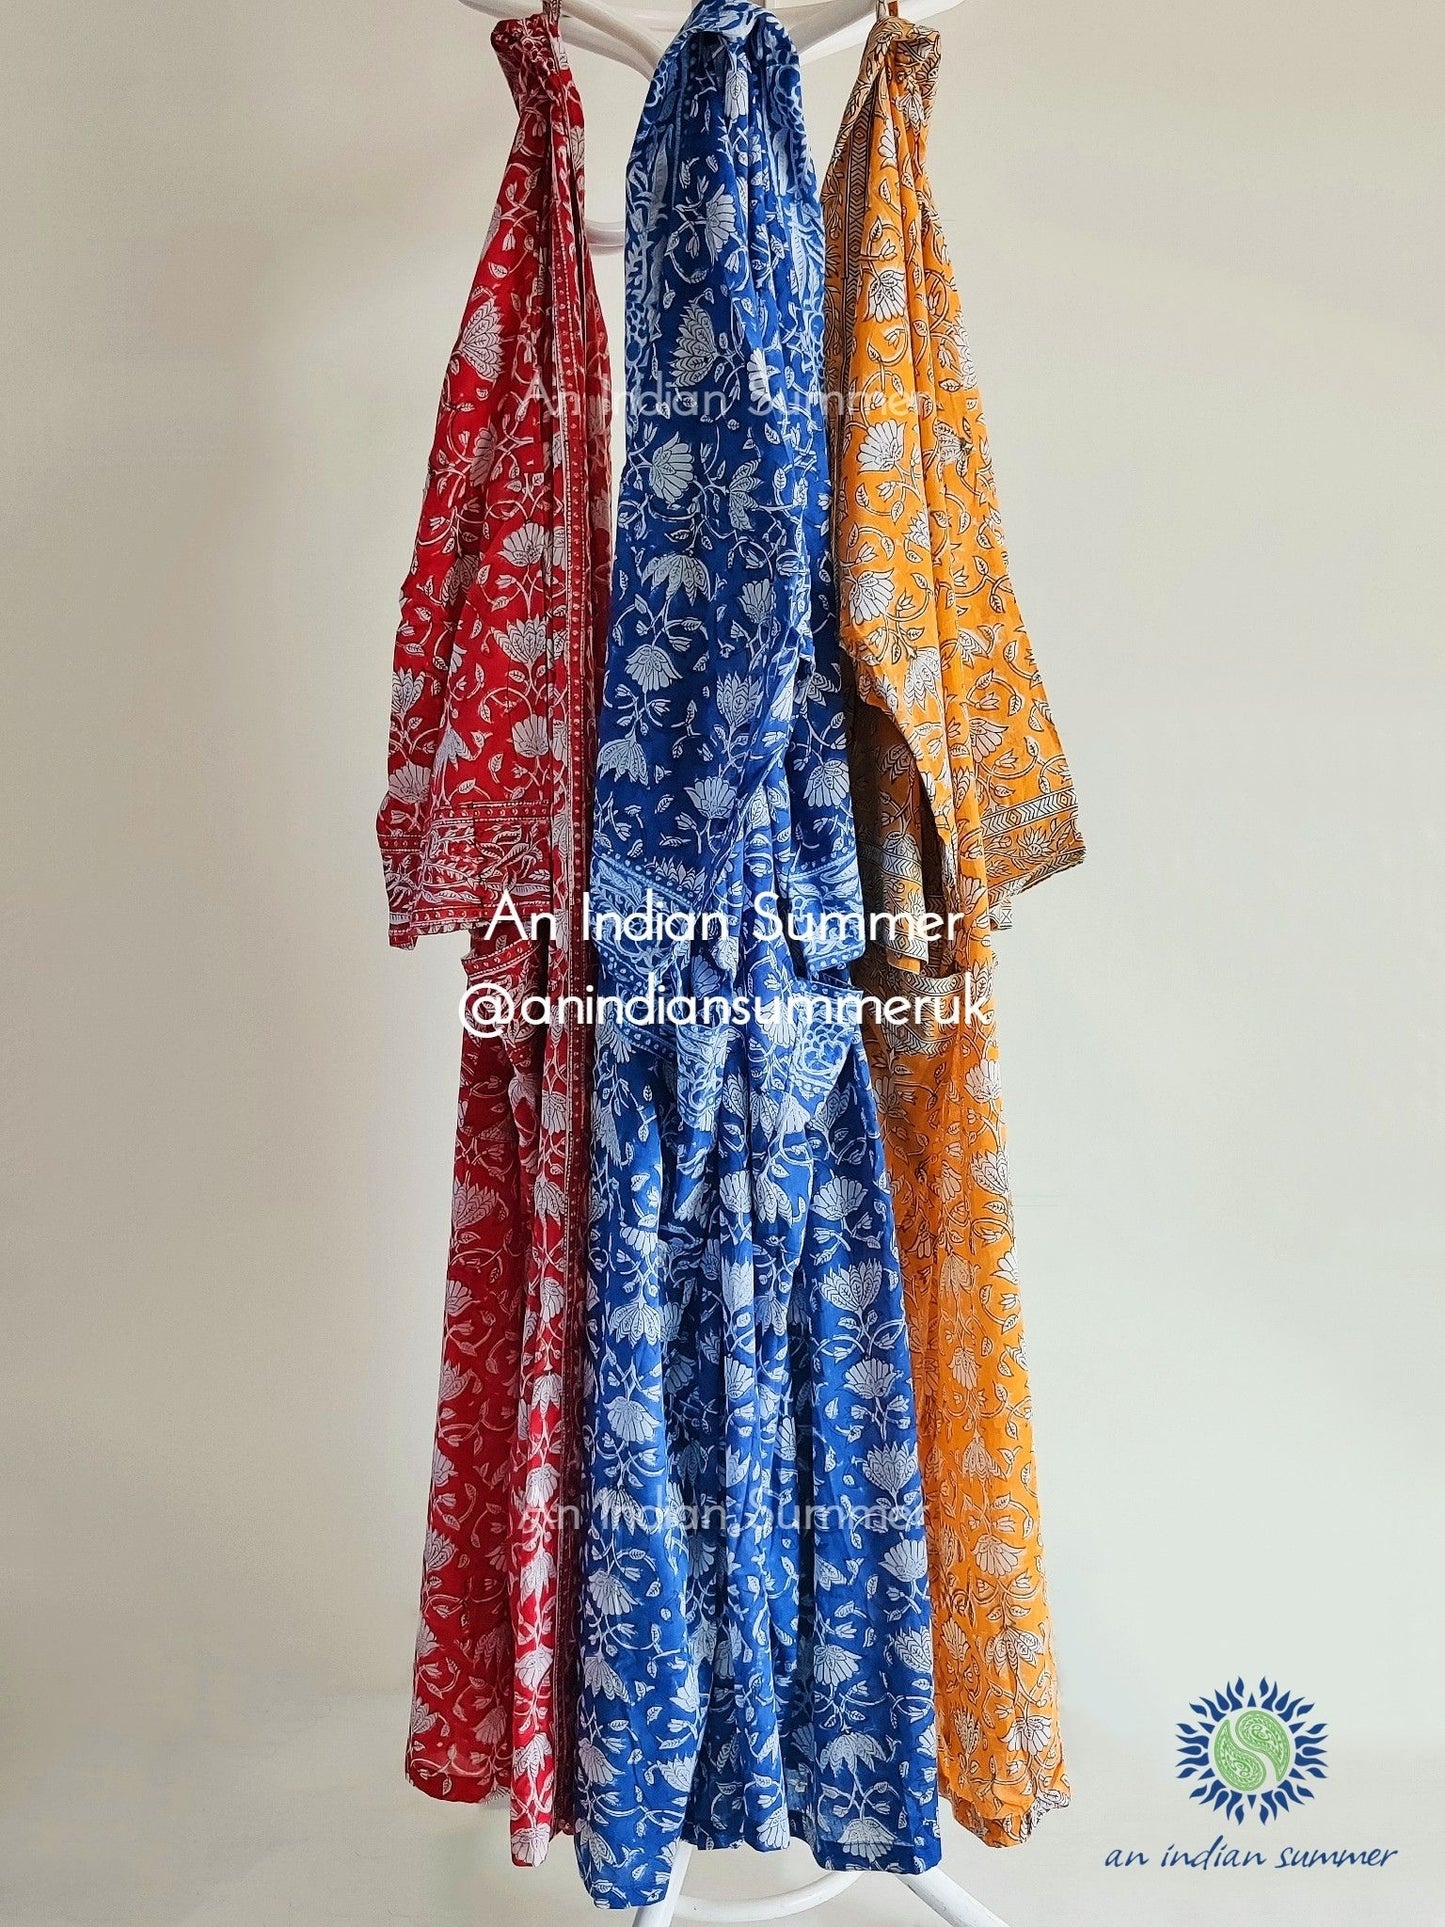 Long Kimono Robe | Lotus | Red Blue Yellow | Floral Block Print | Hand Block Printed | Cotton Voile | An Indian Summer | Seasonless Timeless Sustainable Ethical Authentic Artisan Conscious Clothing Lifestyle Brand